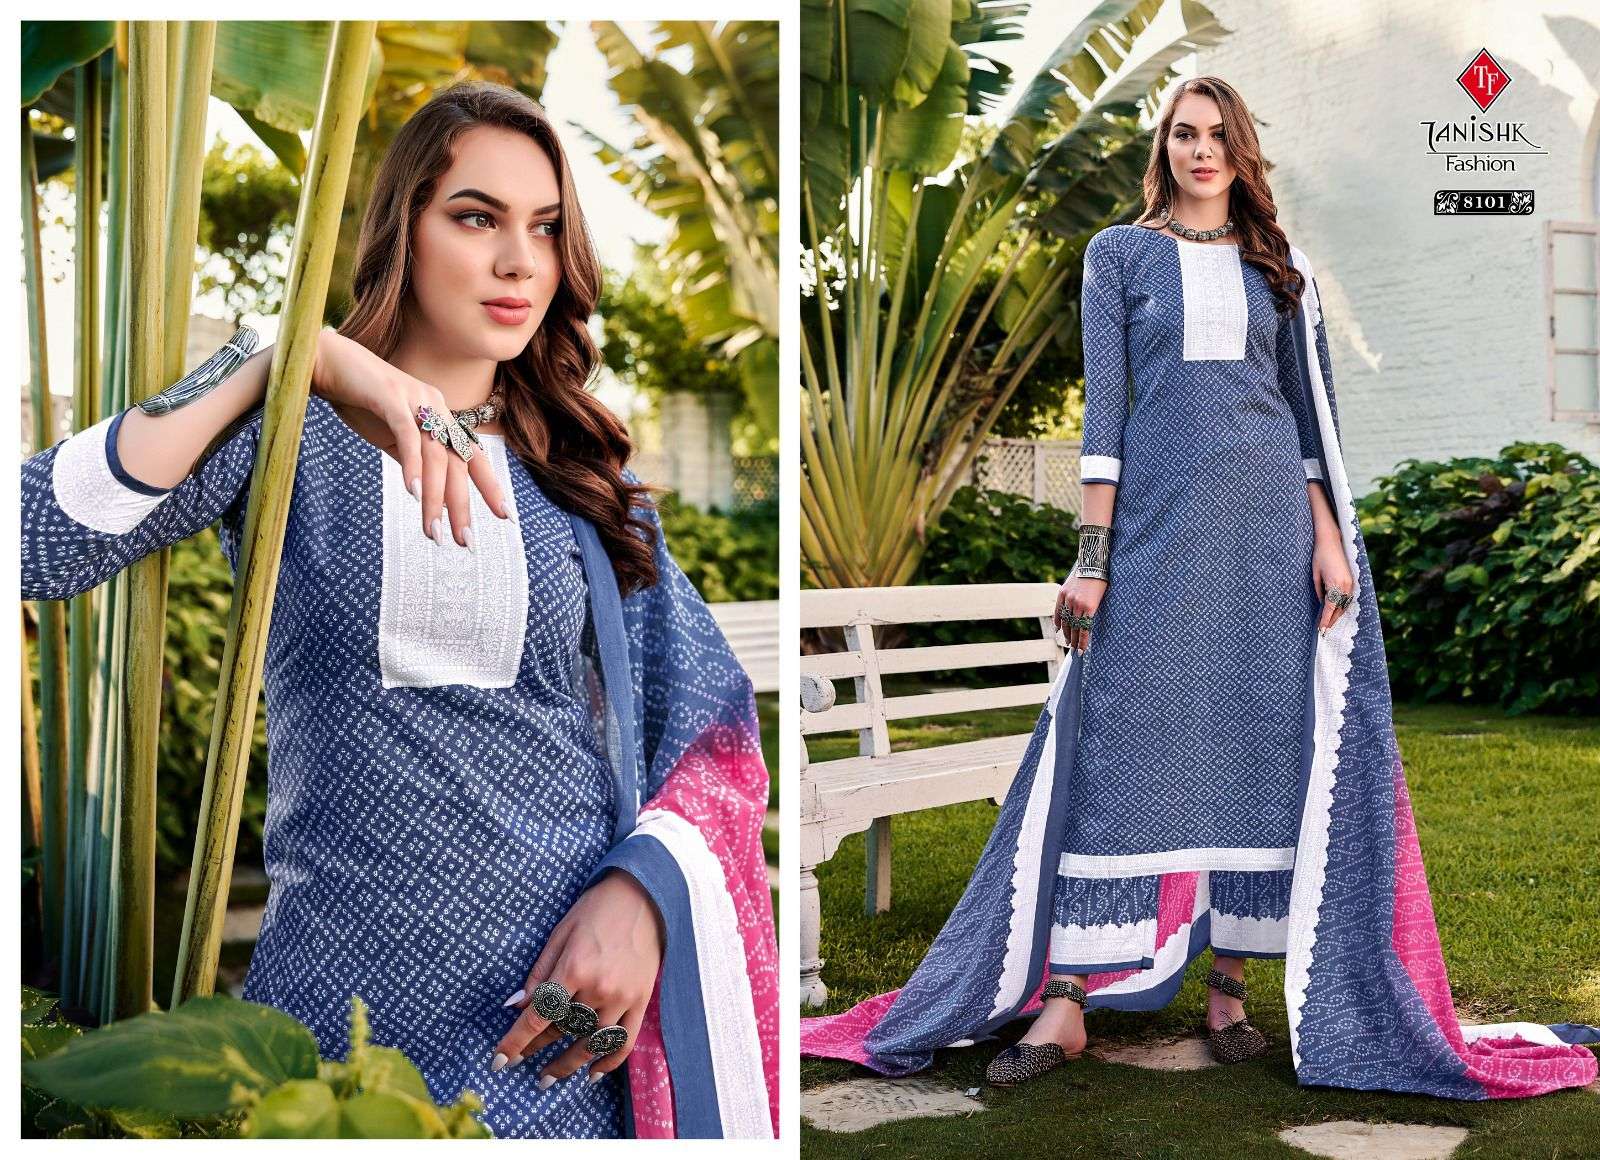 Bandhej Vol-2 By Tanishk Fashion 8101 To 8108 Series Beautiful Suits Colorful Stylish Fancy Casual Wear & Ethnic Wear Cotton Print Dresses At Wholesale Price